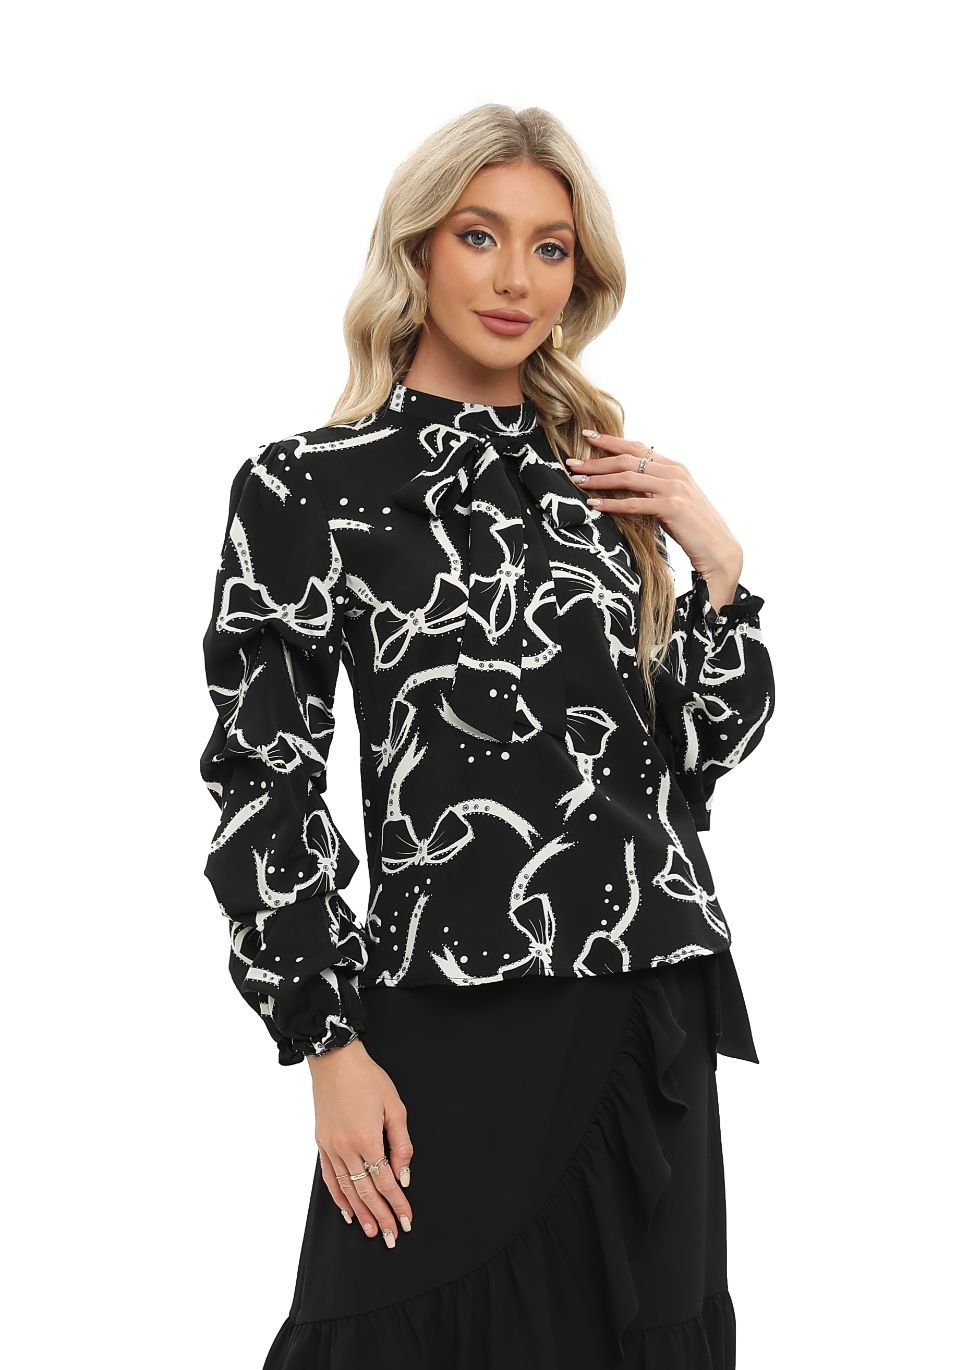 Tiered Long Sleeve Blouse with Front Tie - seilerlanguageservices